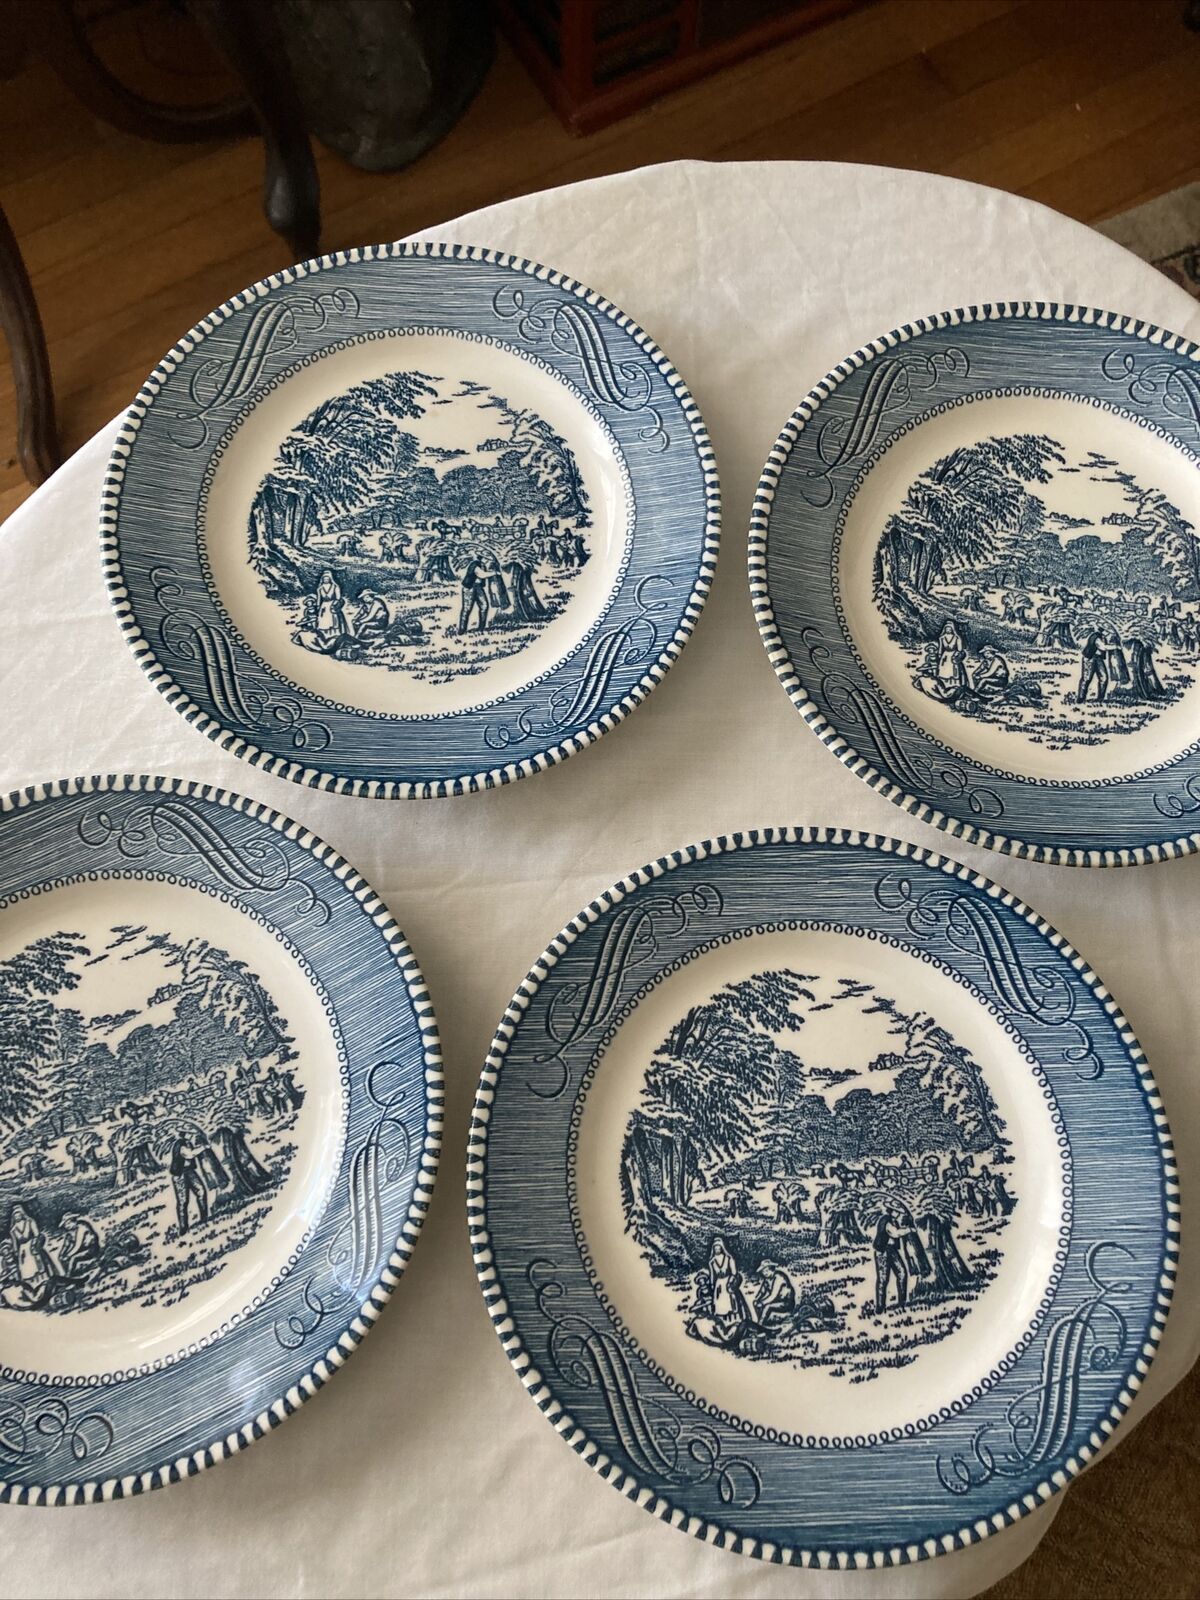 4 Bread & Butter Plates Currier & Ives By Royal 6-1/2" The Harvest Imperial Blue